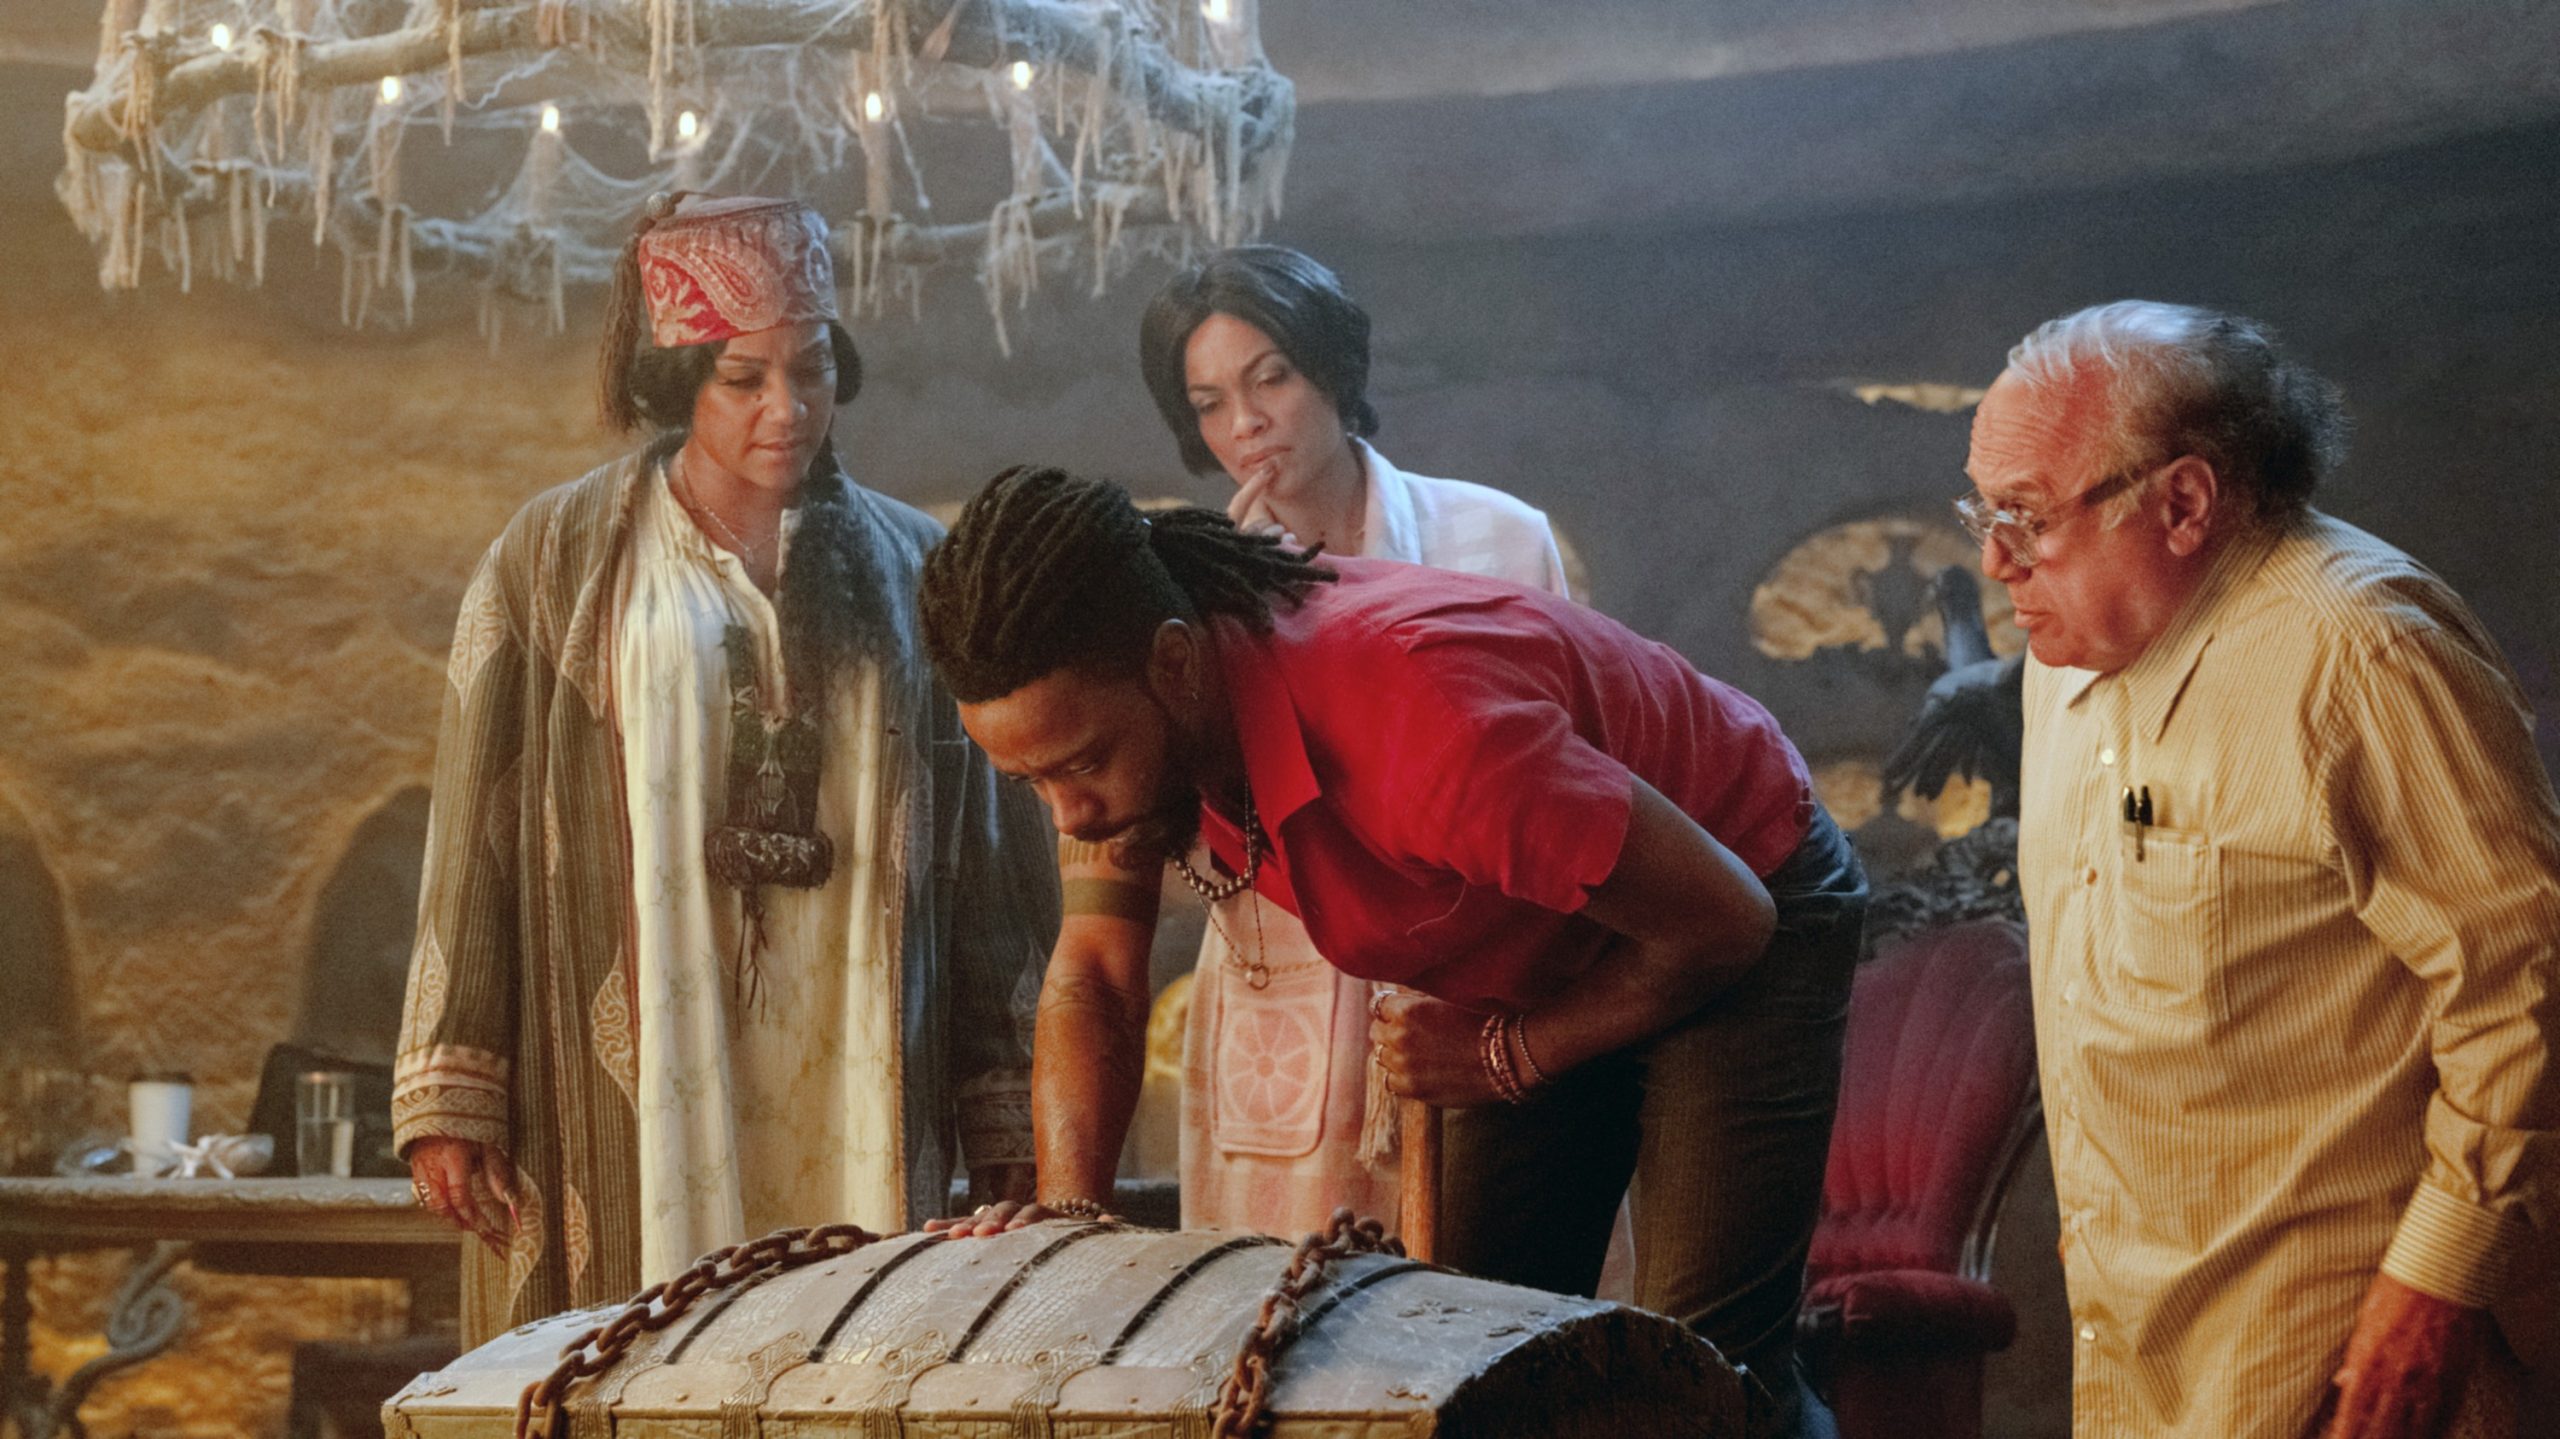 HAUNTED MANSION, from left: Tiffany Haddish, Rosario Dawson, LaKeith Stanfield, Danny DeVito, 2023. ph: Jalen Marlowe / © Walt Disney Studios Motion Pictures / Courtesy Everett Collection